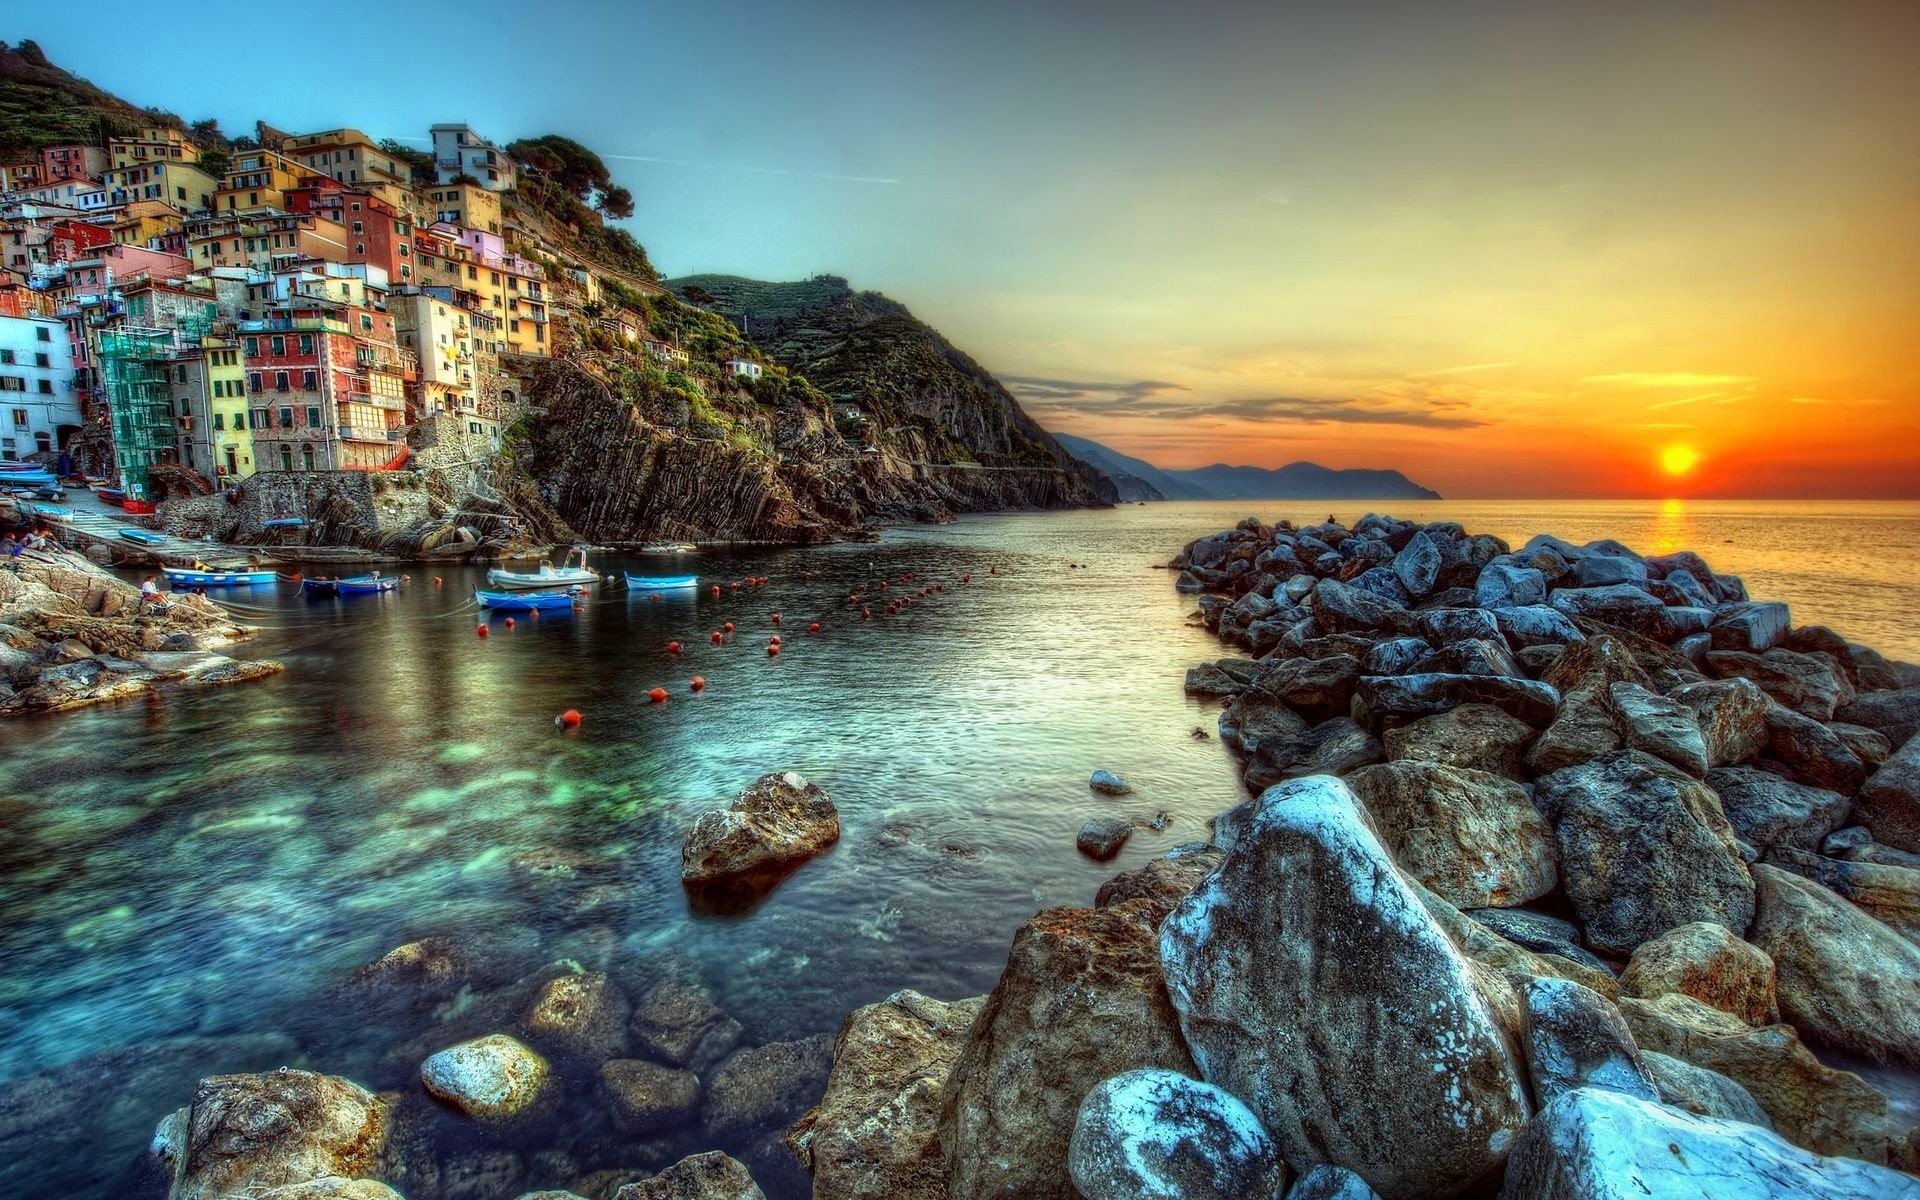 1920x1200 Italy Wallpapers Full Hd On Wallpaper Hd 1920 x 1200 px 692.31 KB  widescreen at night